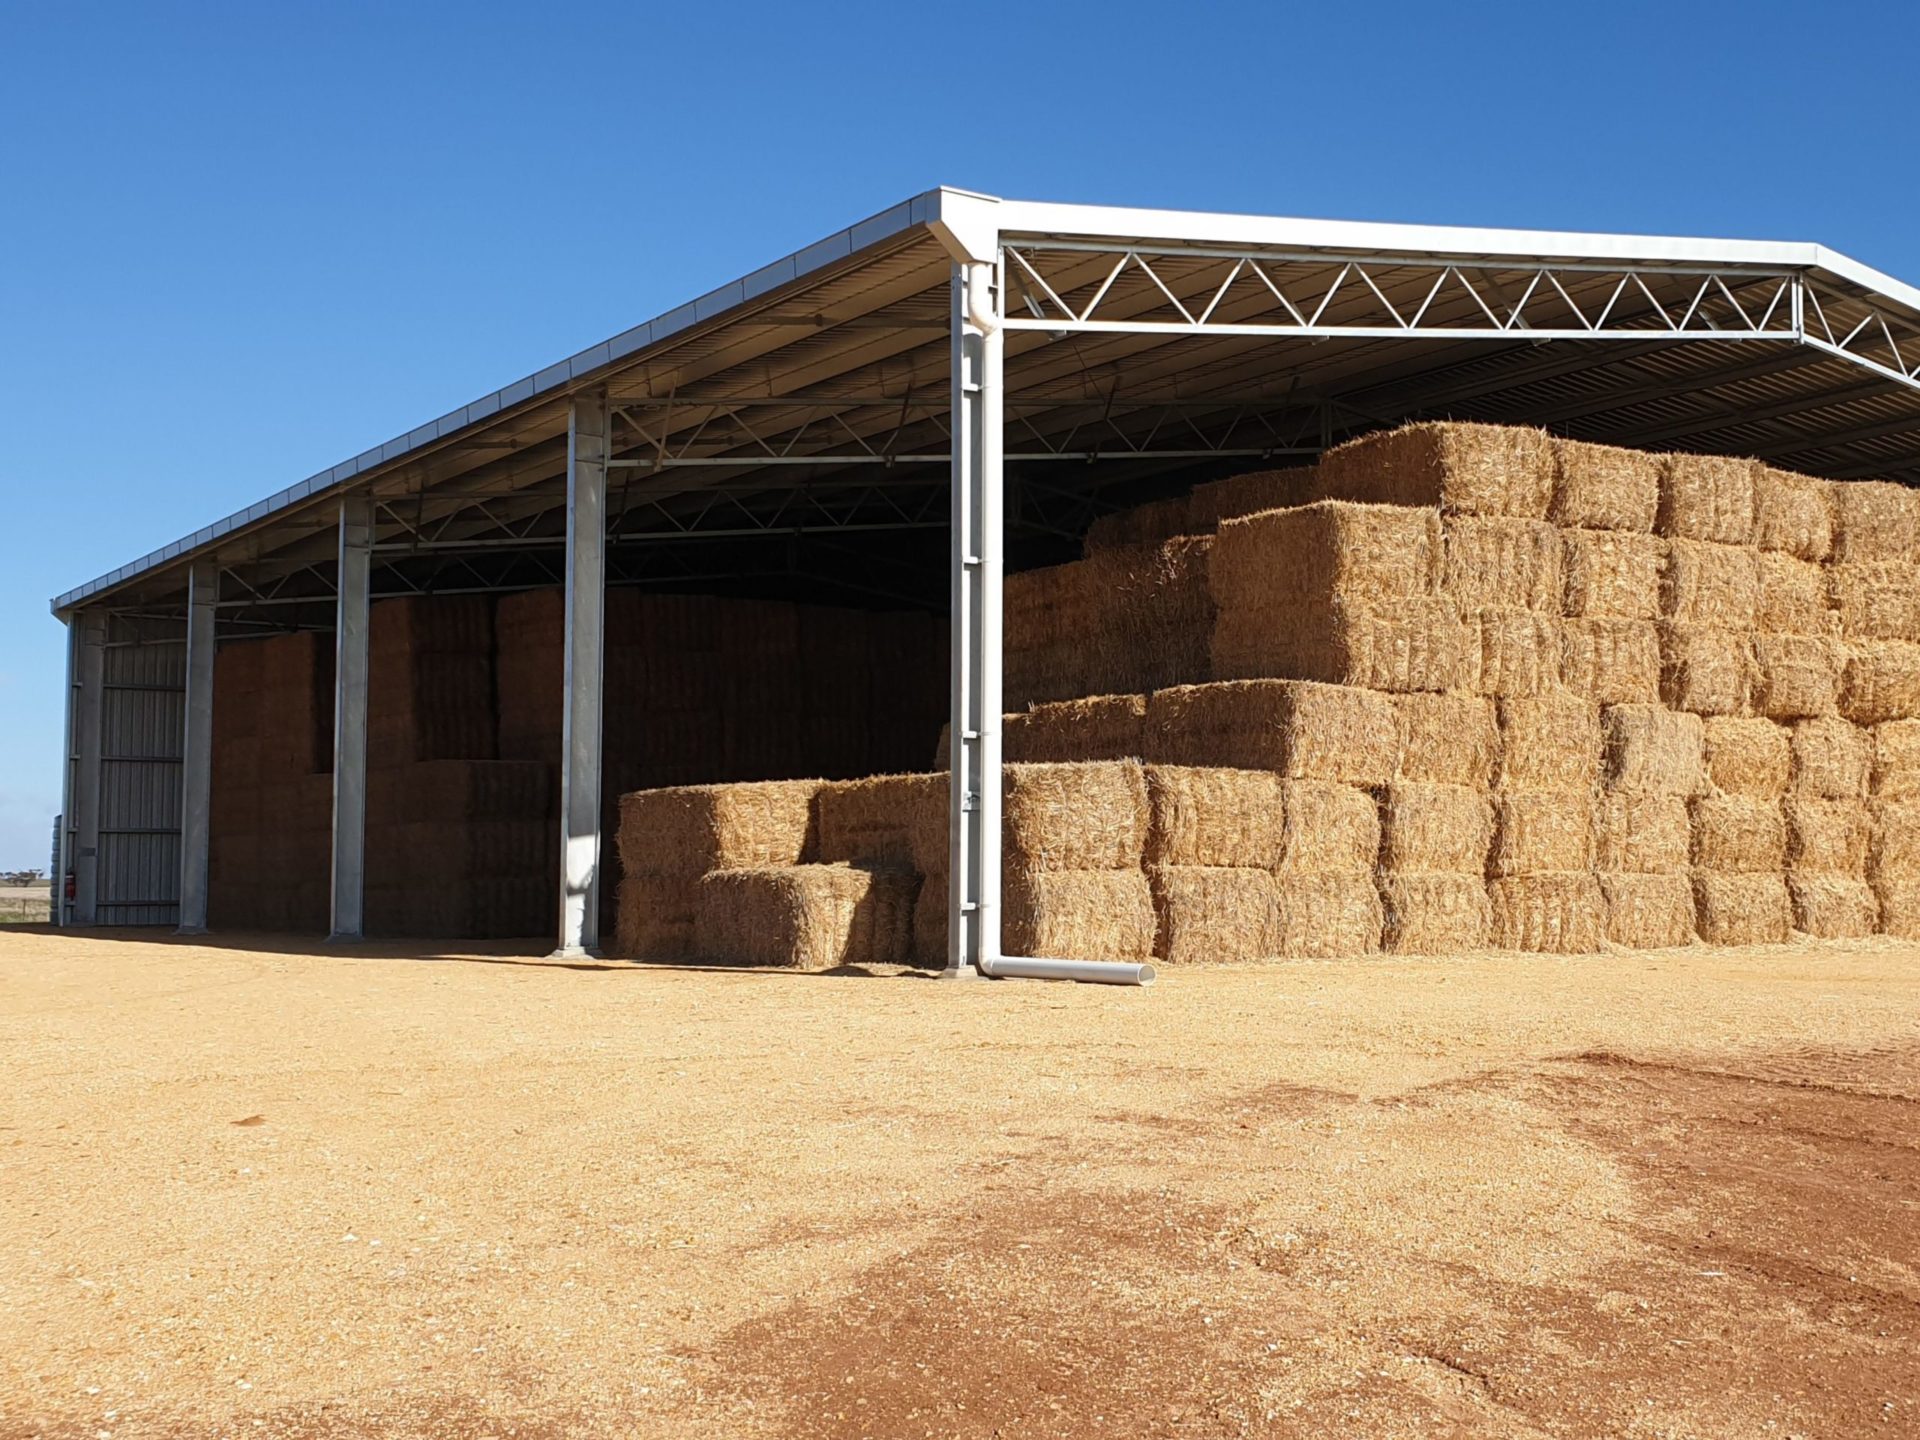 32m x 21m x 6m two-sided hay shed